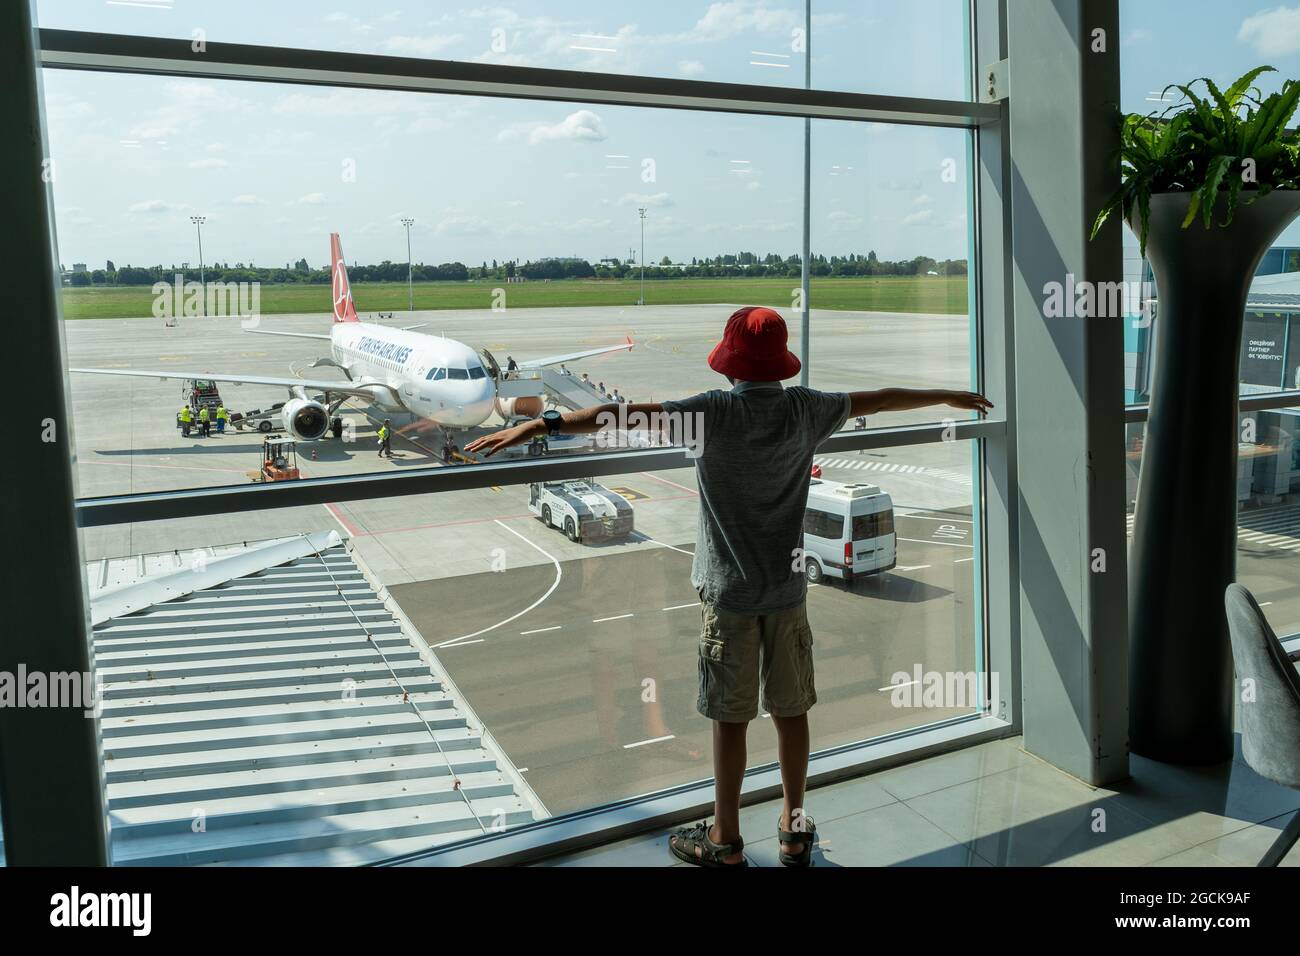 Ukraine, Odessa - August 3, 2021: At the ODS airport await departure. The plane is outside the window. A child is looking at the plane through the Stock Photo